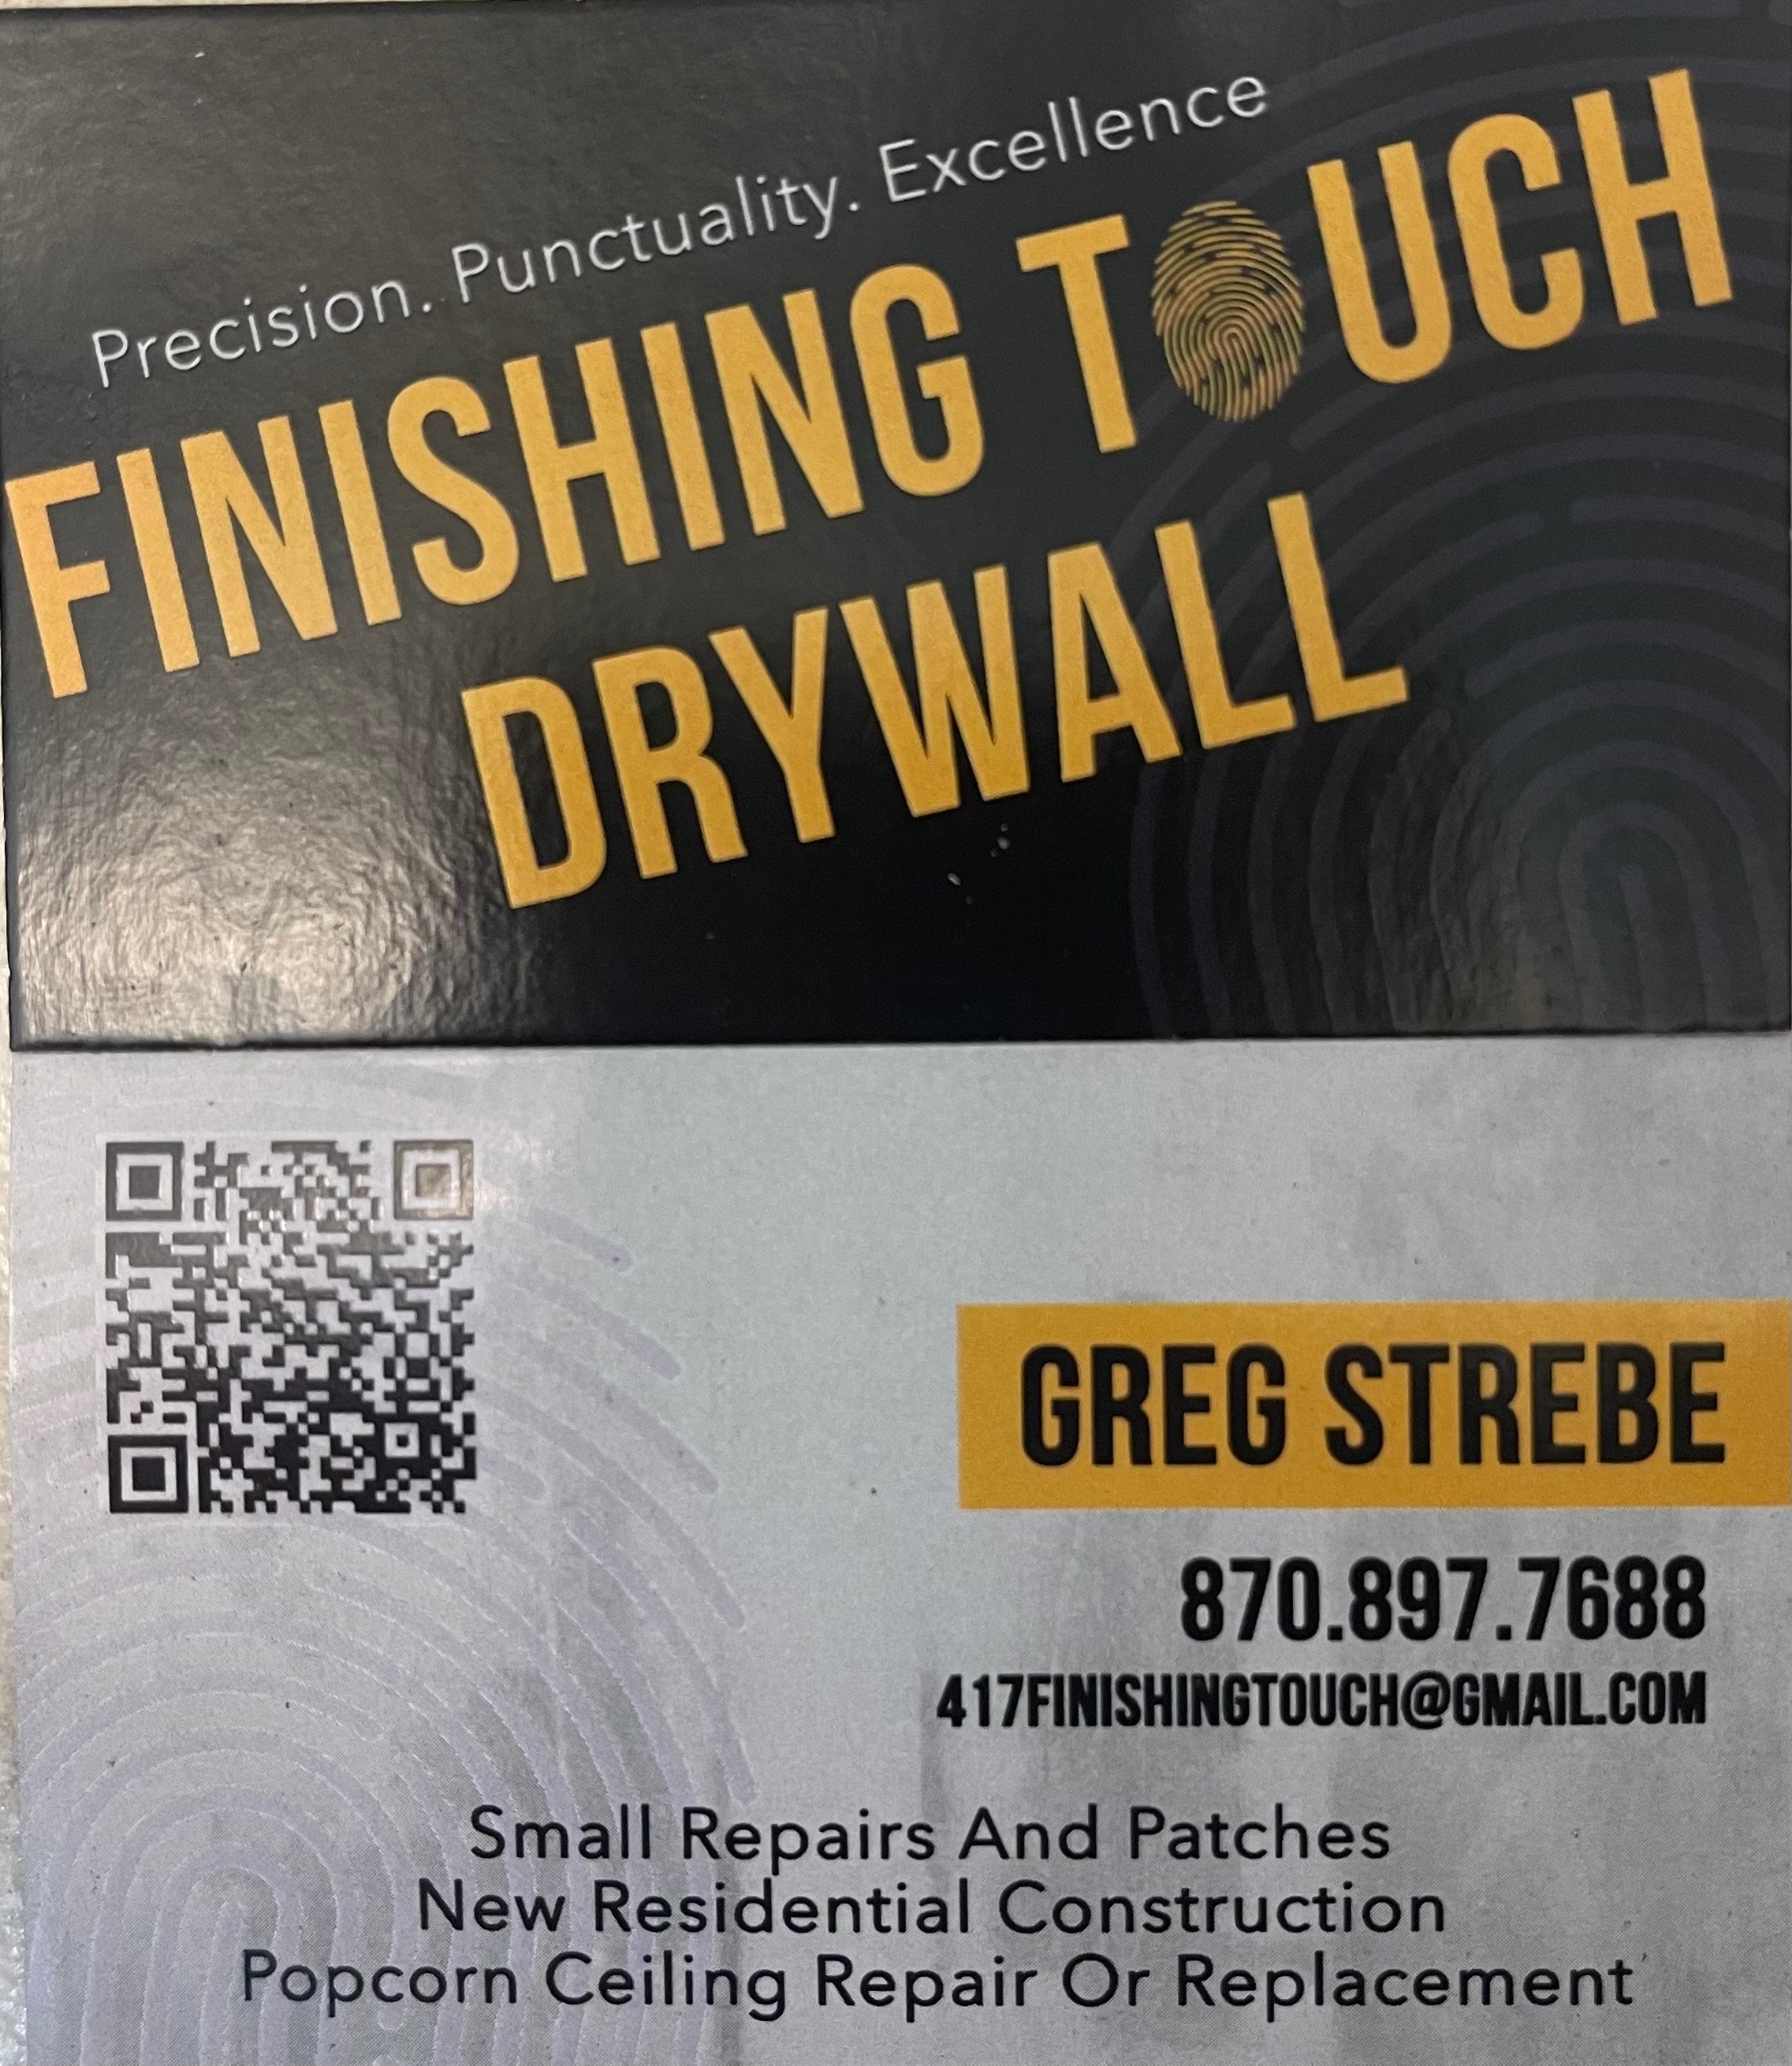 The Finishing Touch Drywall Logo